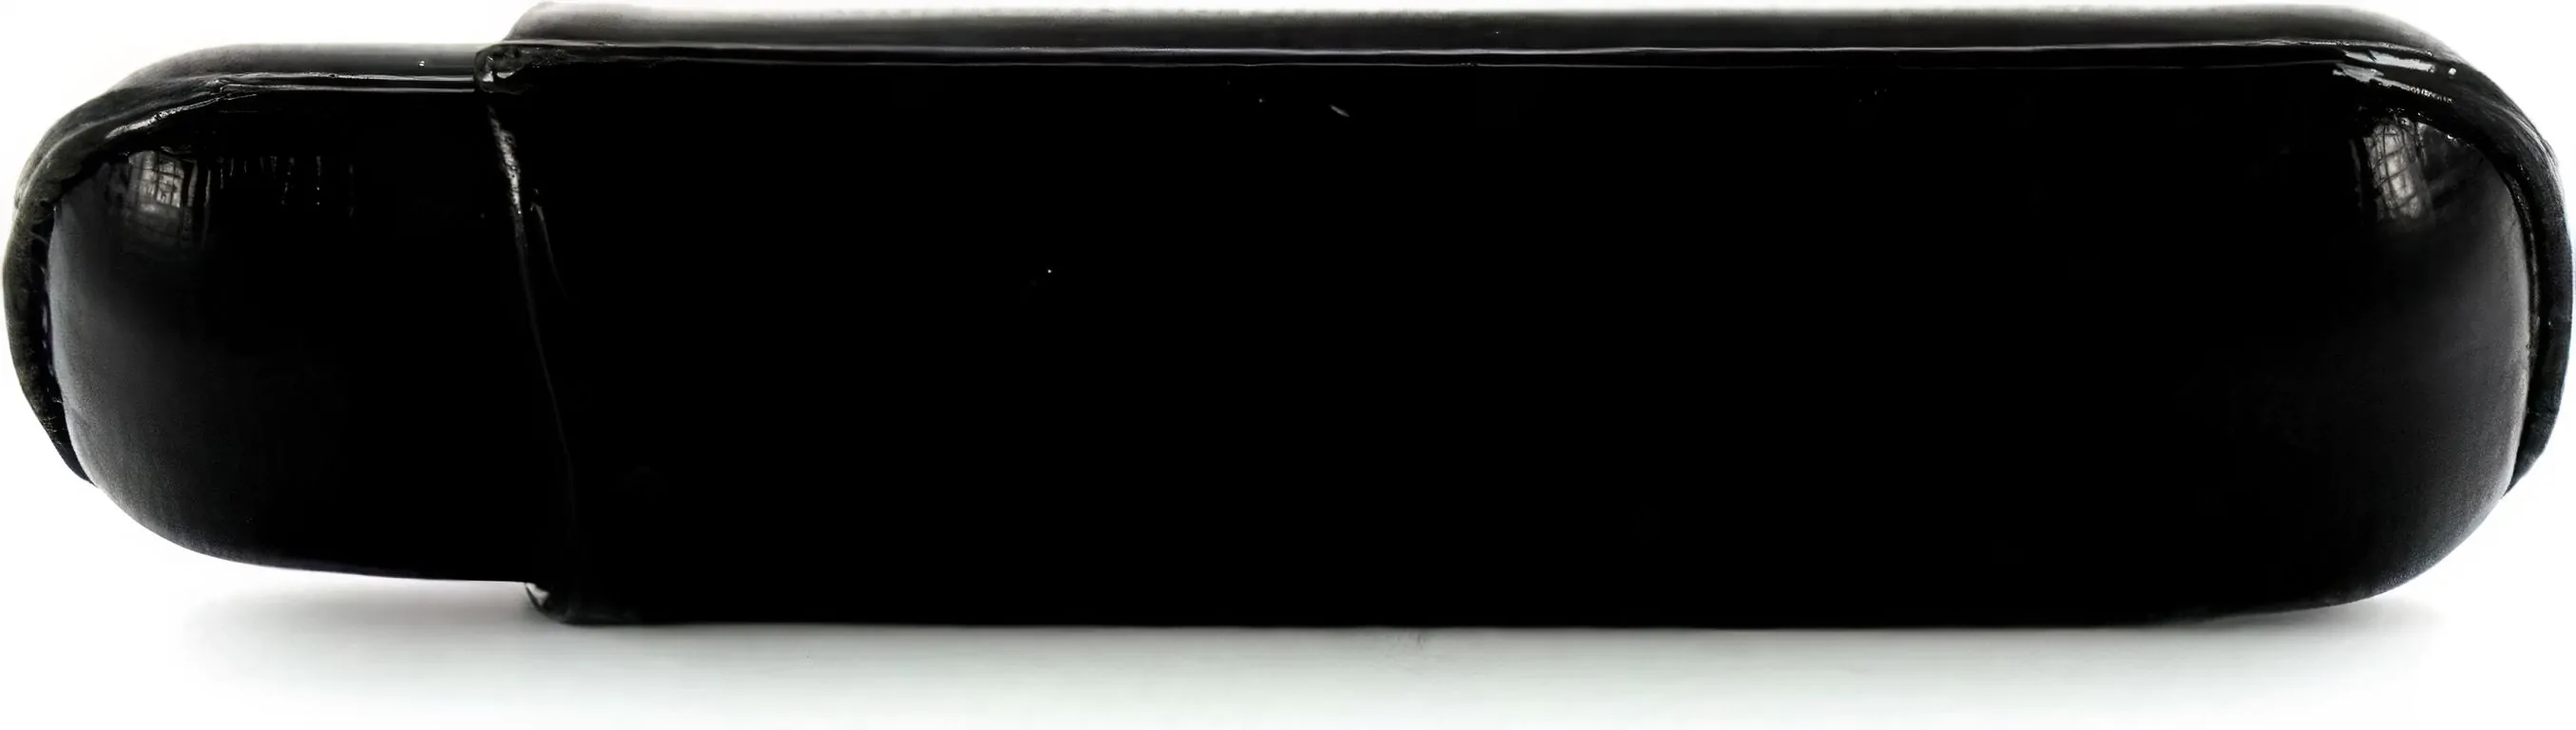 MARTIN WESS BLACK COWHIDE/ GOATSKIN LEATHER 6 CIGARILLO CASE * NEW